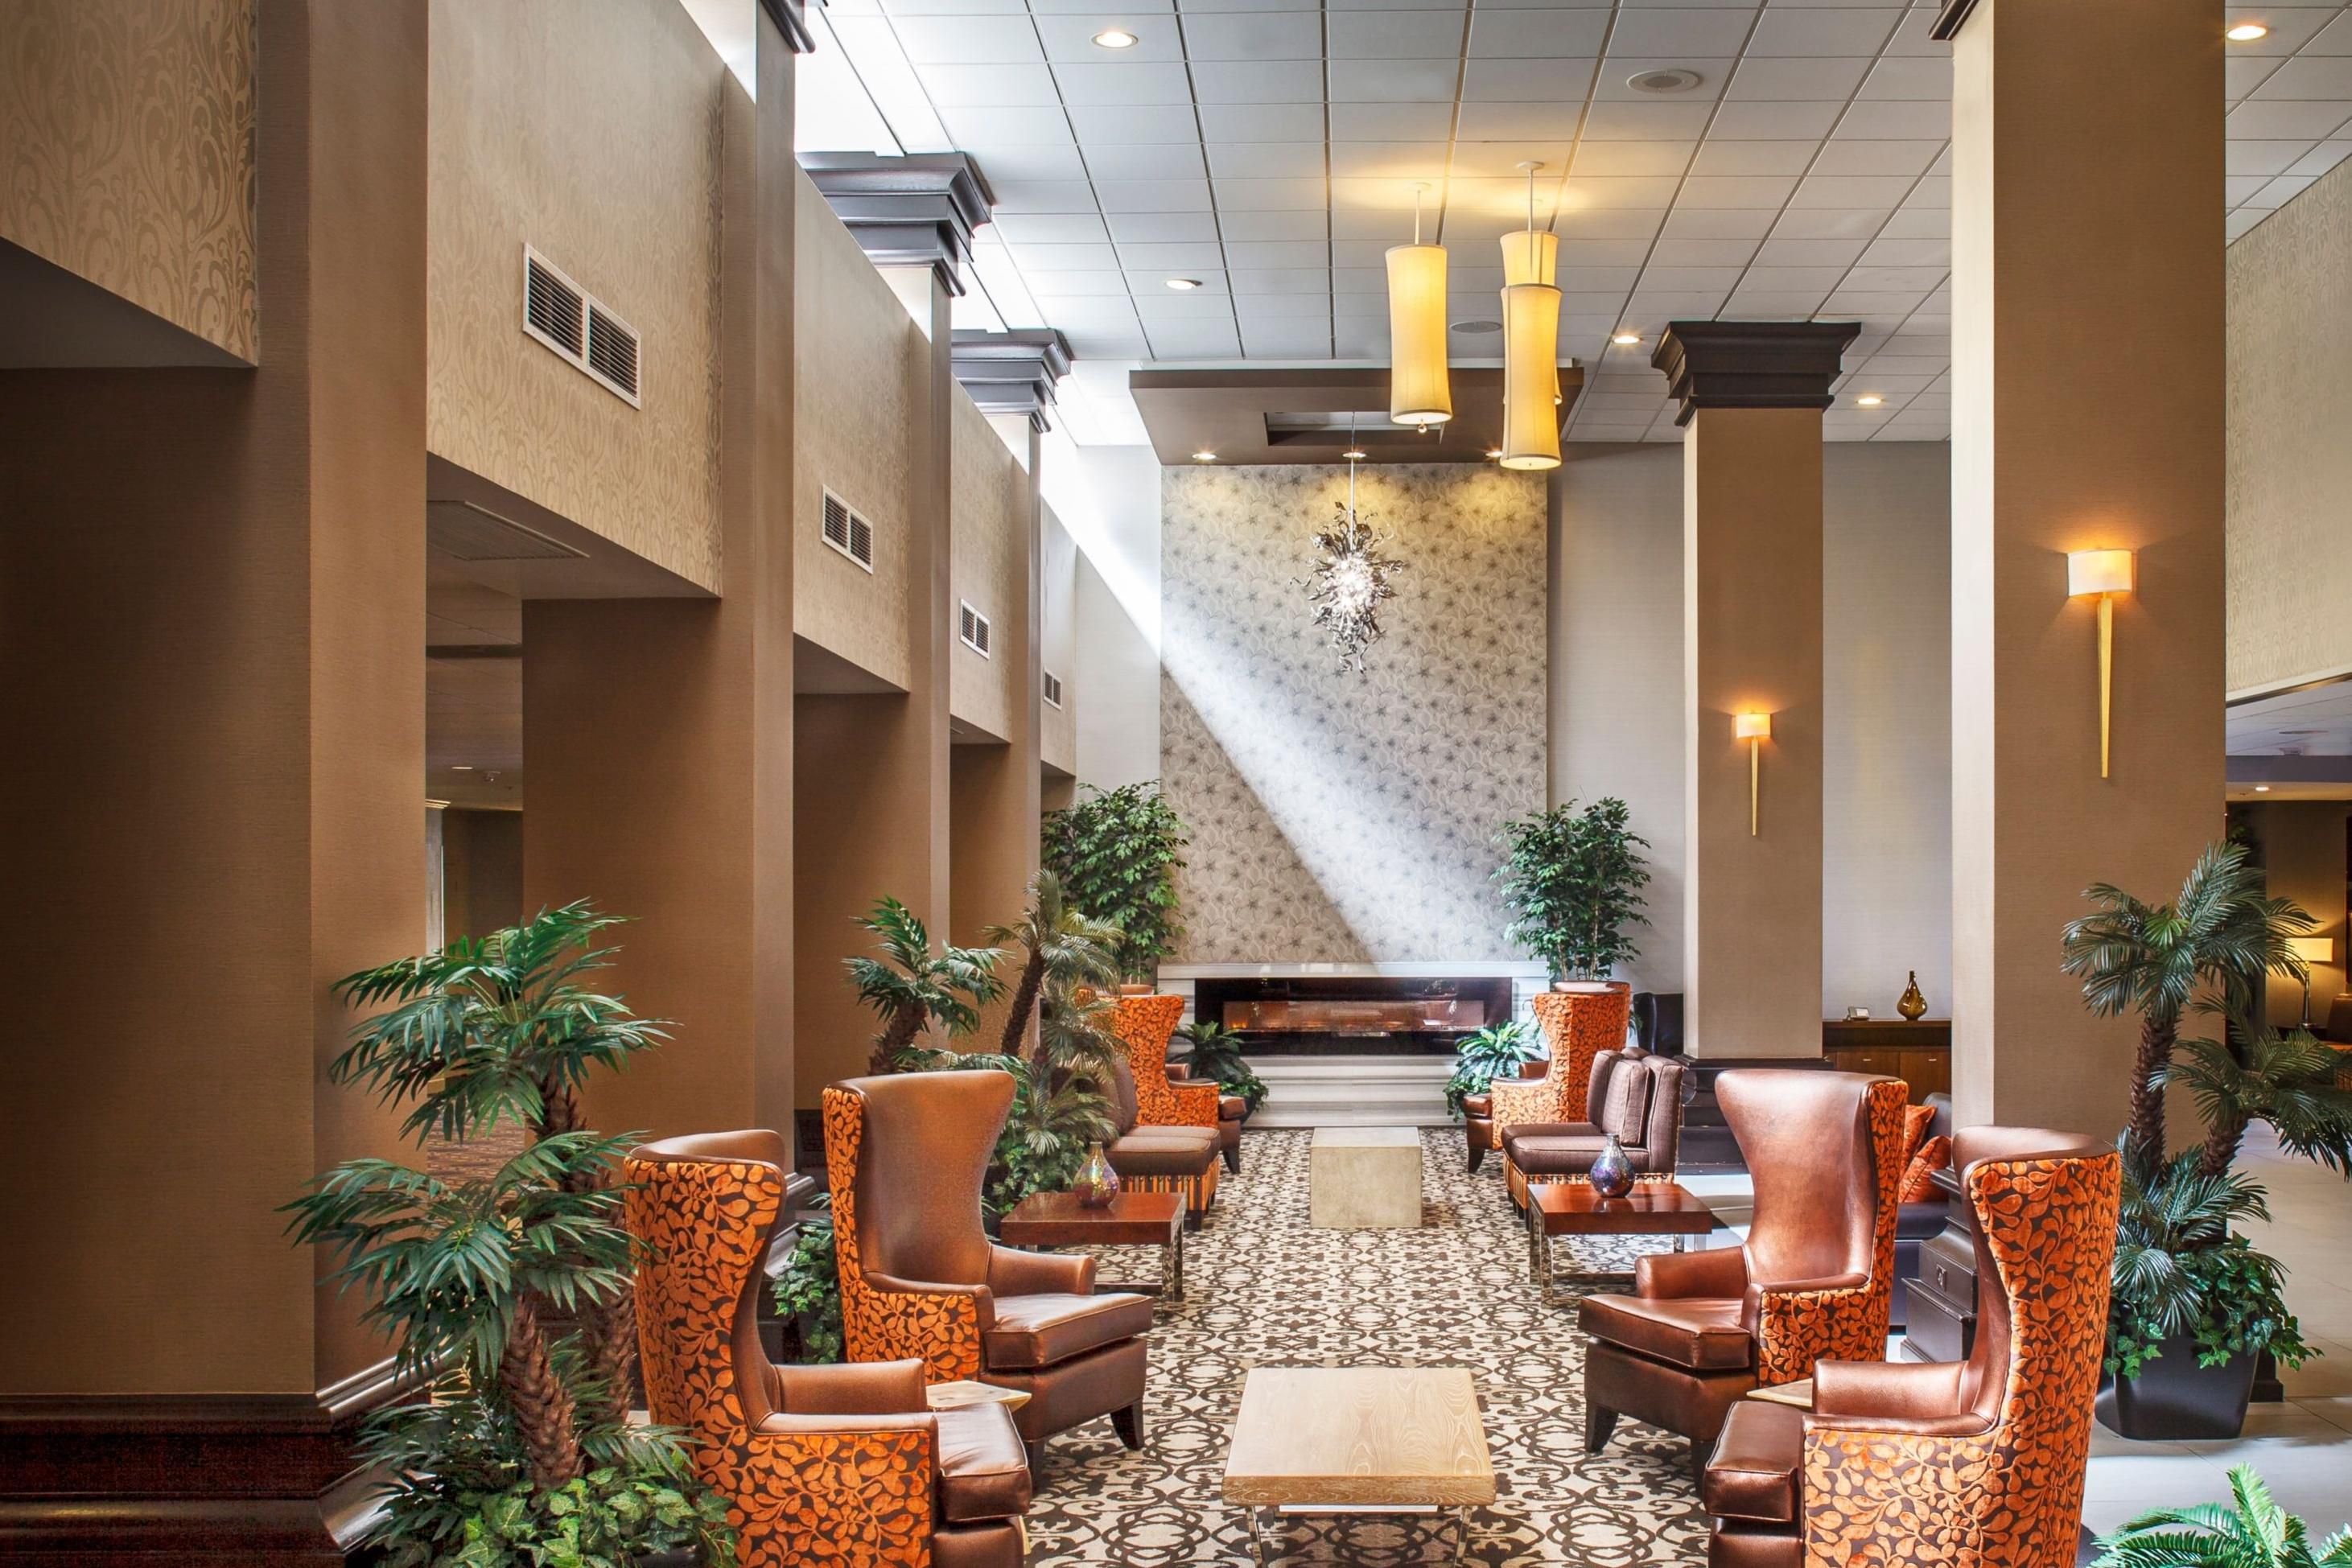 Take a load off in our welcoming lobby for road-weary travelers.